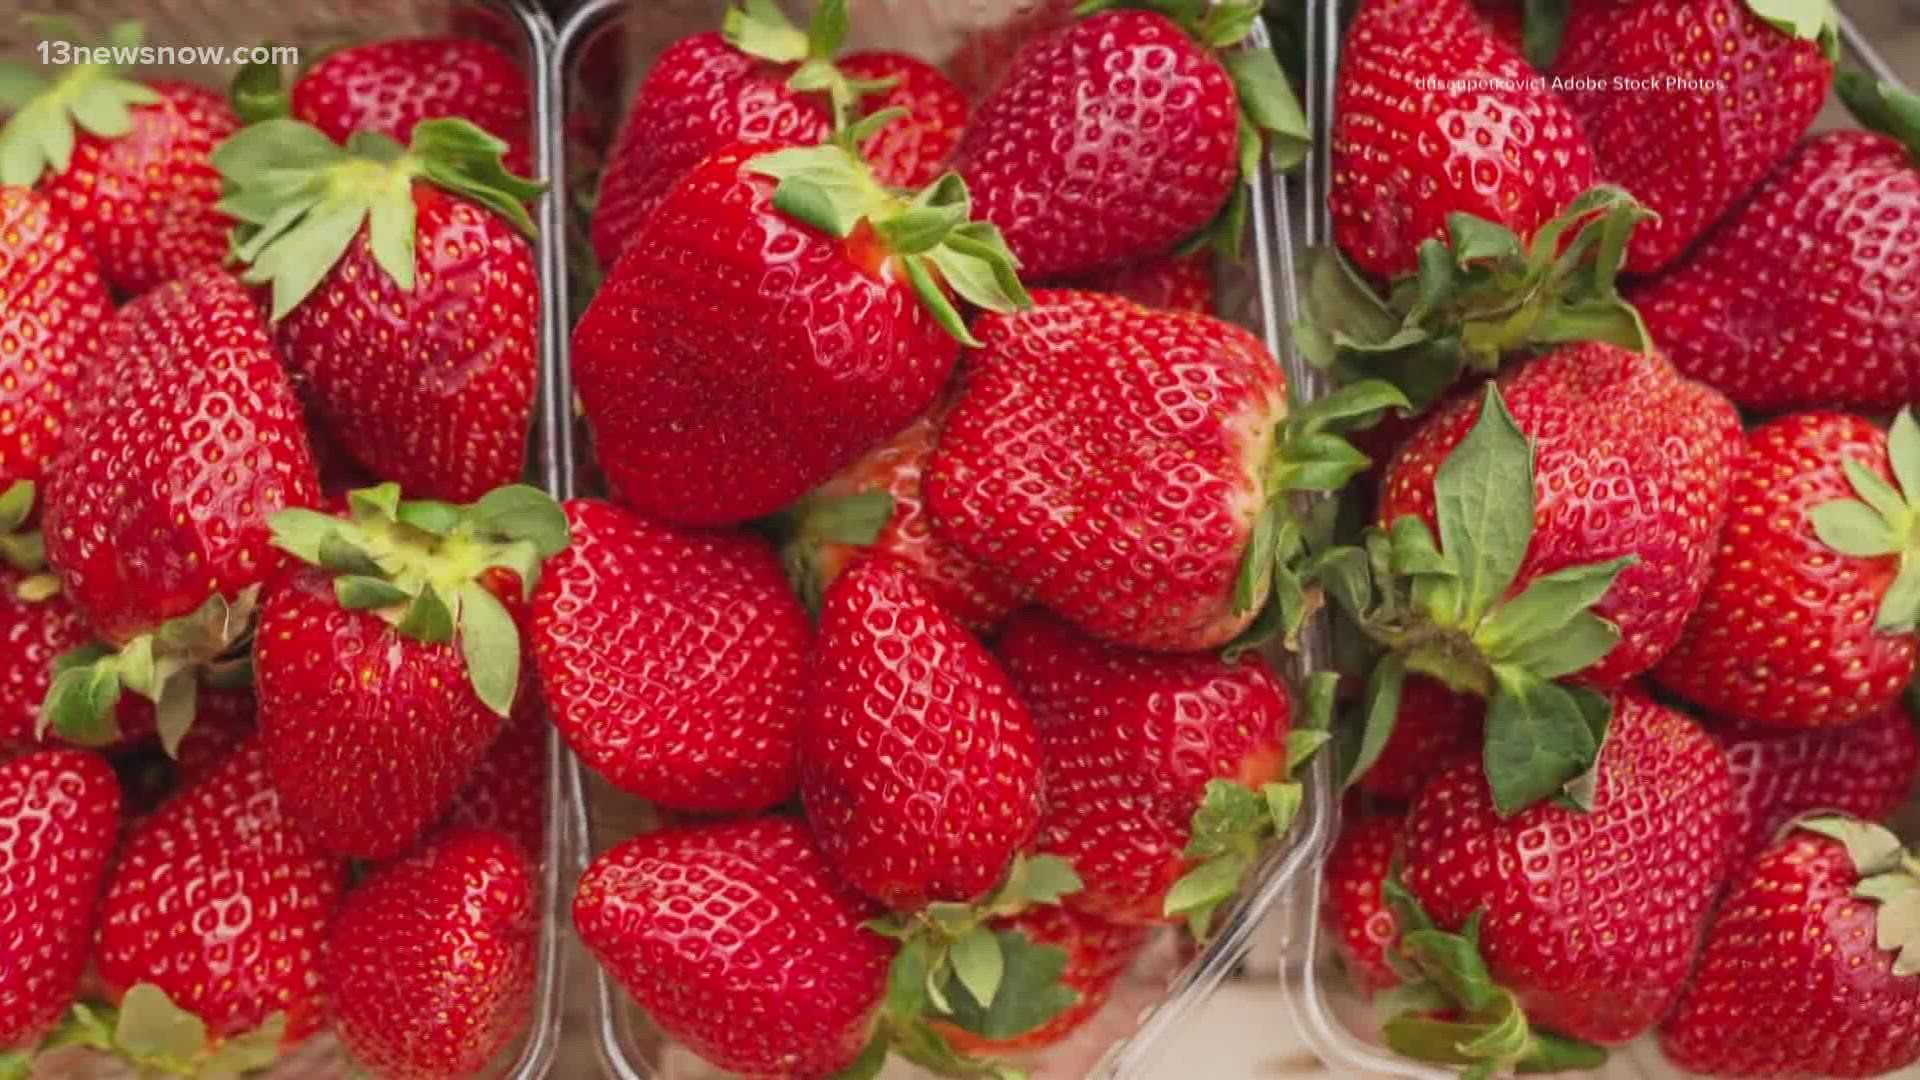 The FDA is investigating a possible link between a hepatitis A outbreak and organic strawberries sold nationwide.